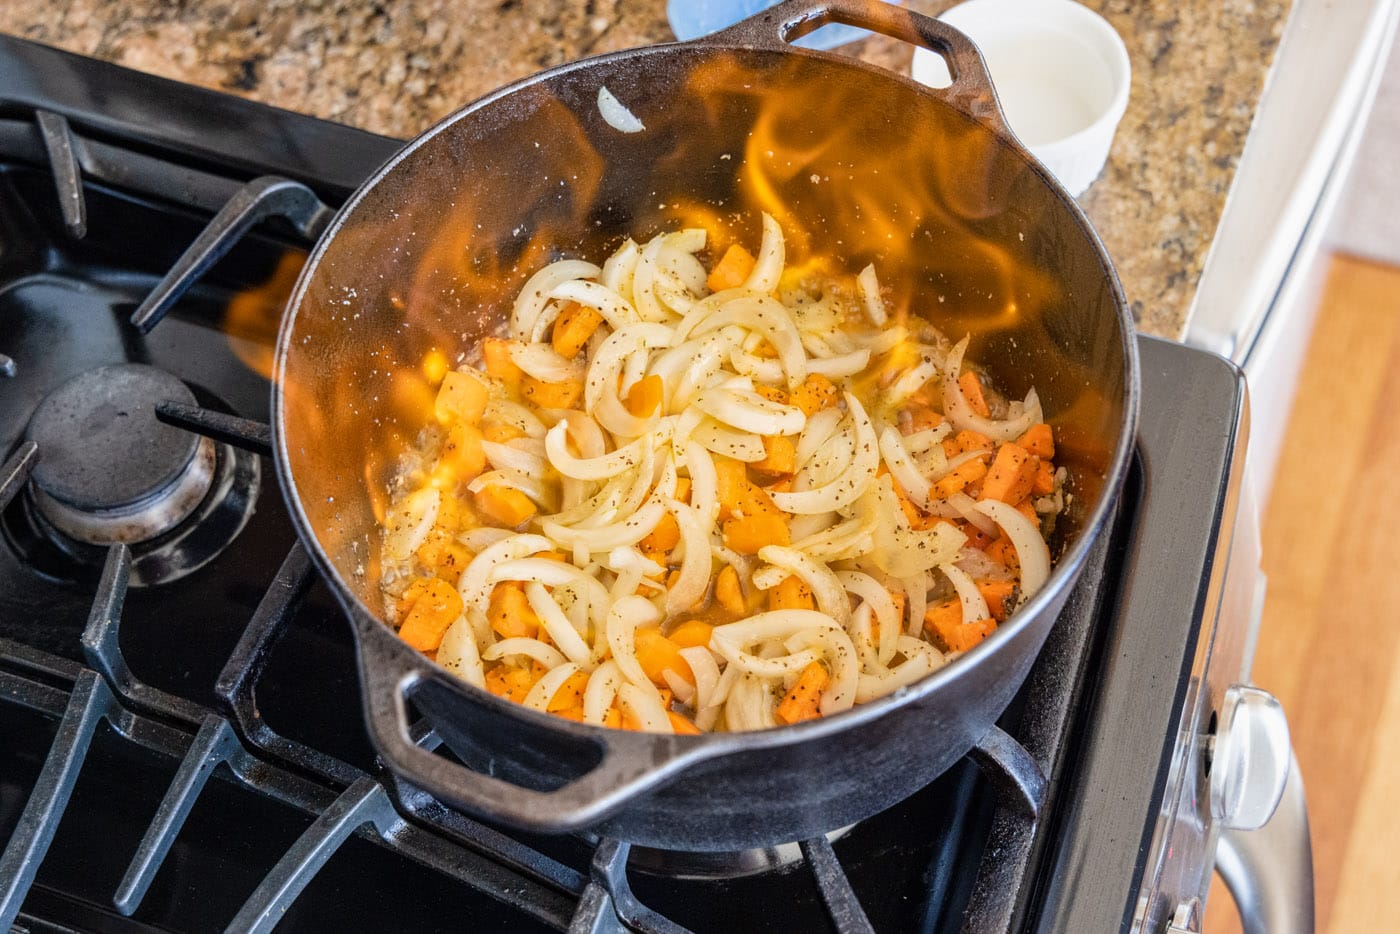 cognac fire over onions and carrots